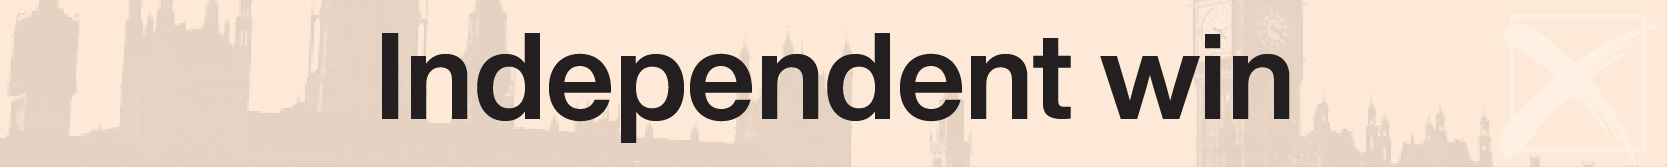 Banner graphic announcing an "Independent win" in black writing against a peach background with a faded image of the Houses of Parliament.